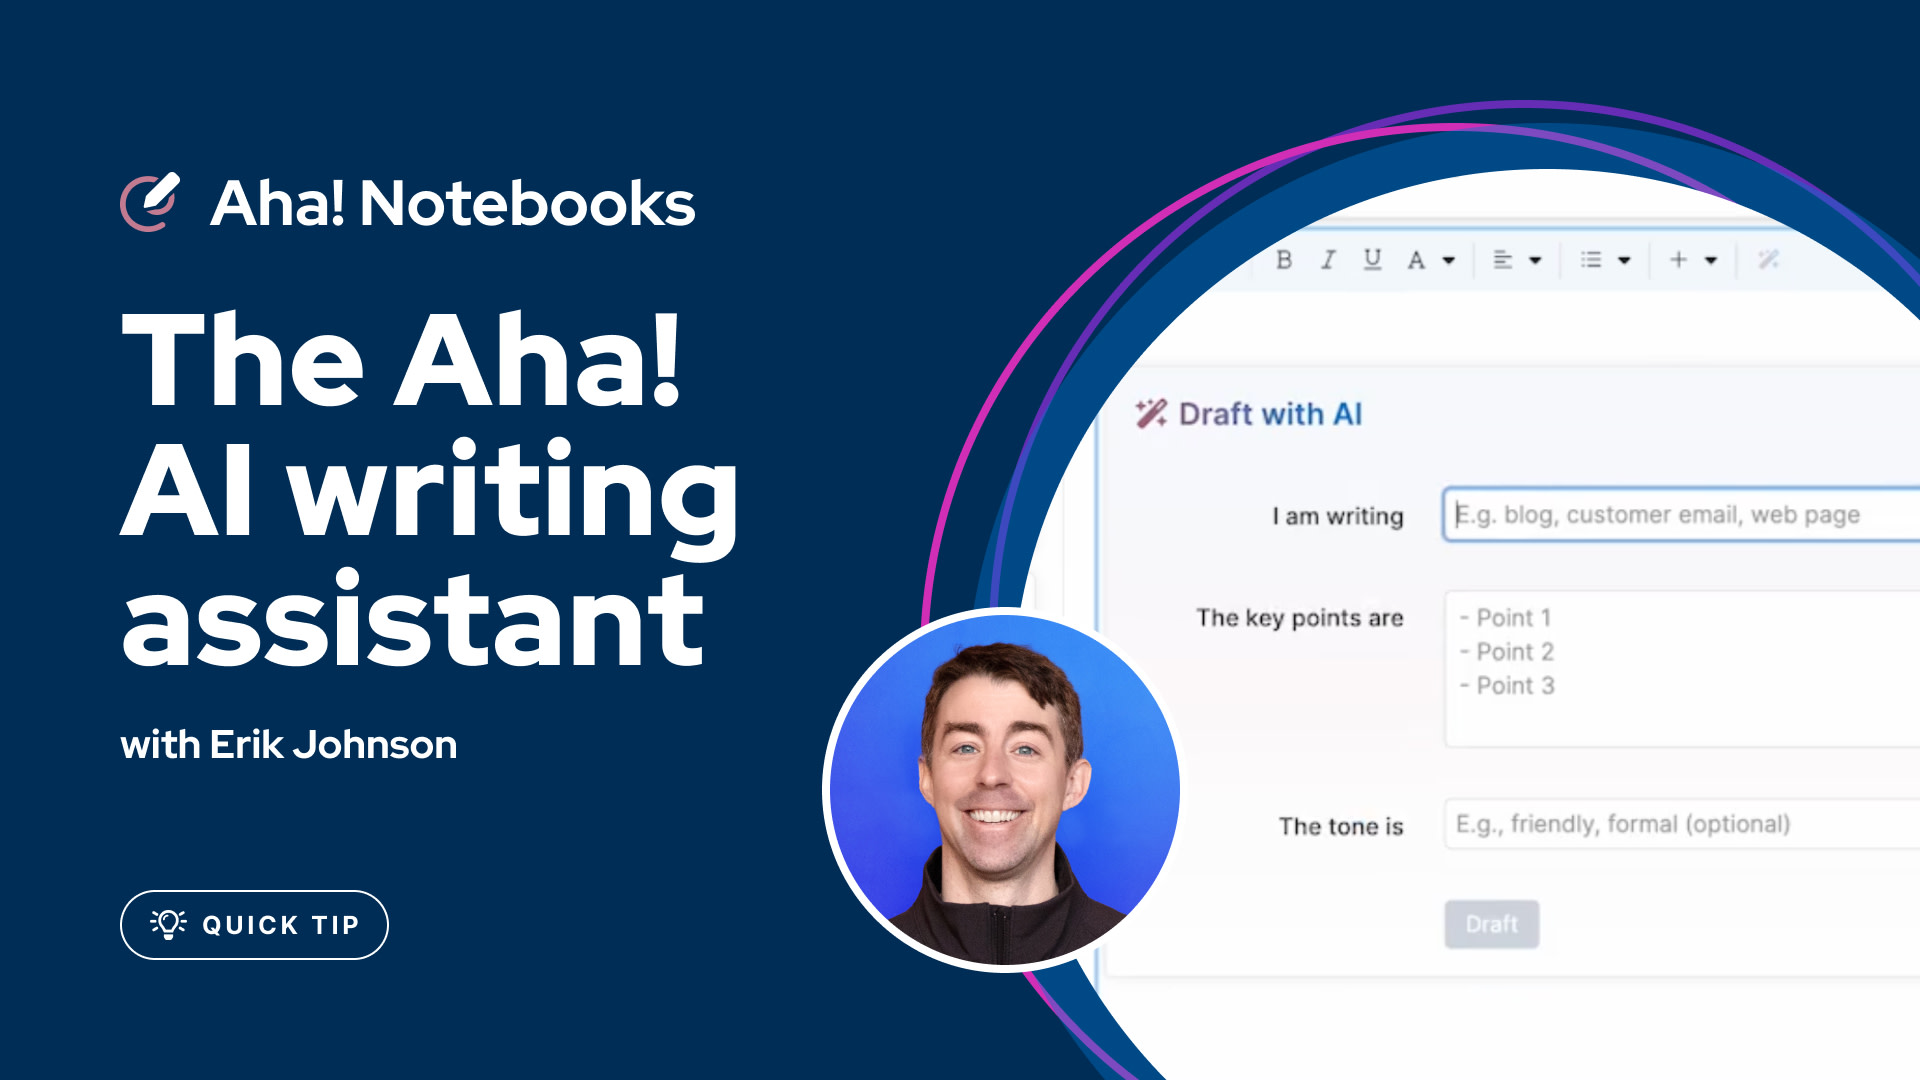 Thumbnail image for the social quick tips AI writing assistant video